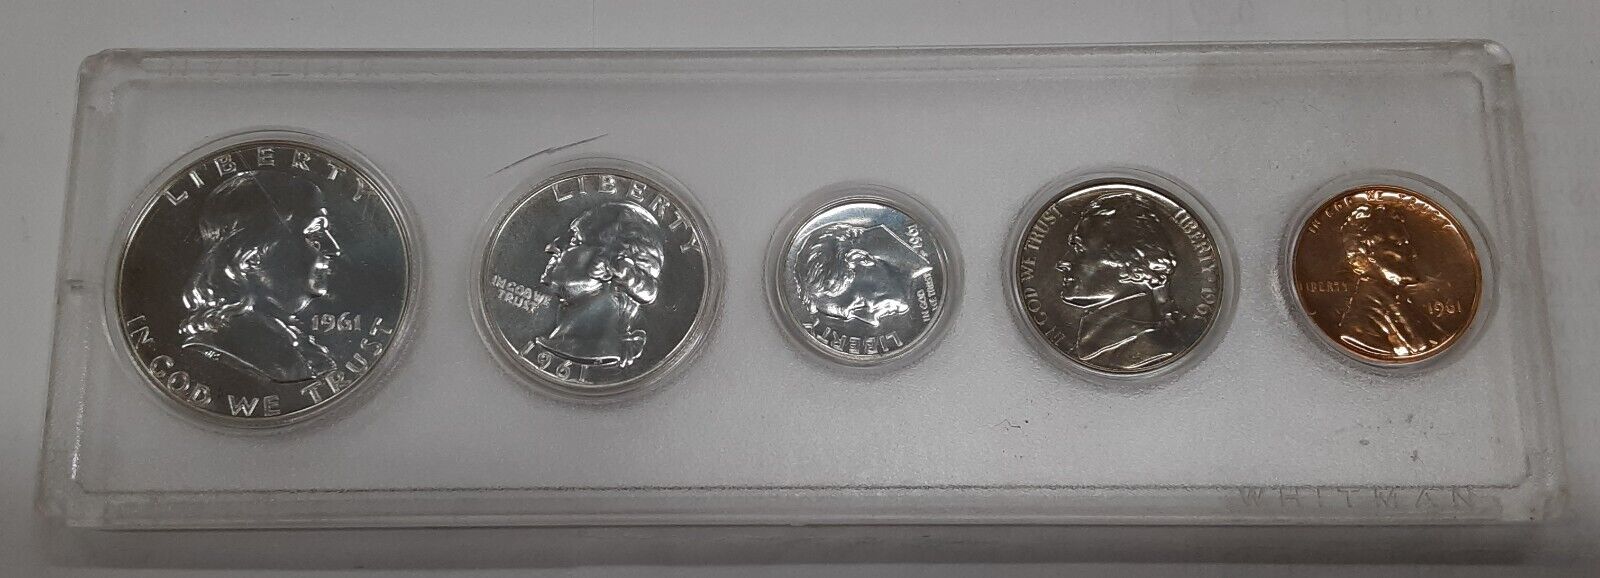 1961 US Mint Silver Proof Set 5 Gem Coins in Whitman Holder